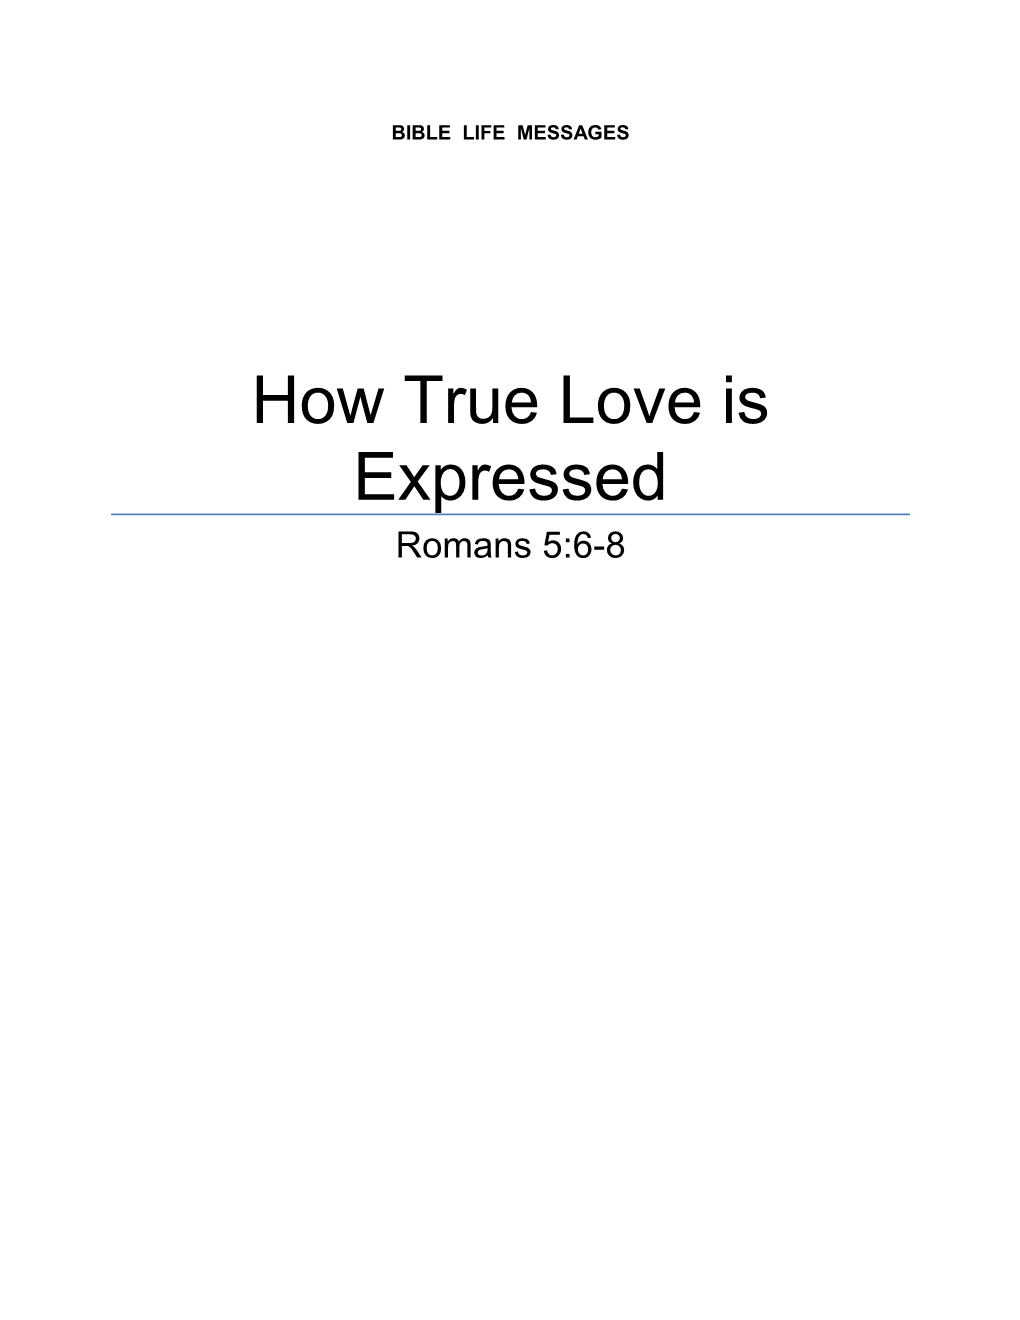 How True Love Is Expressed